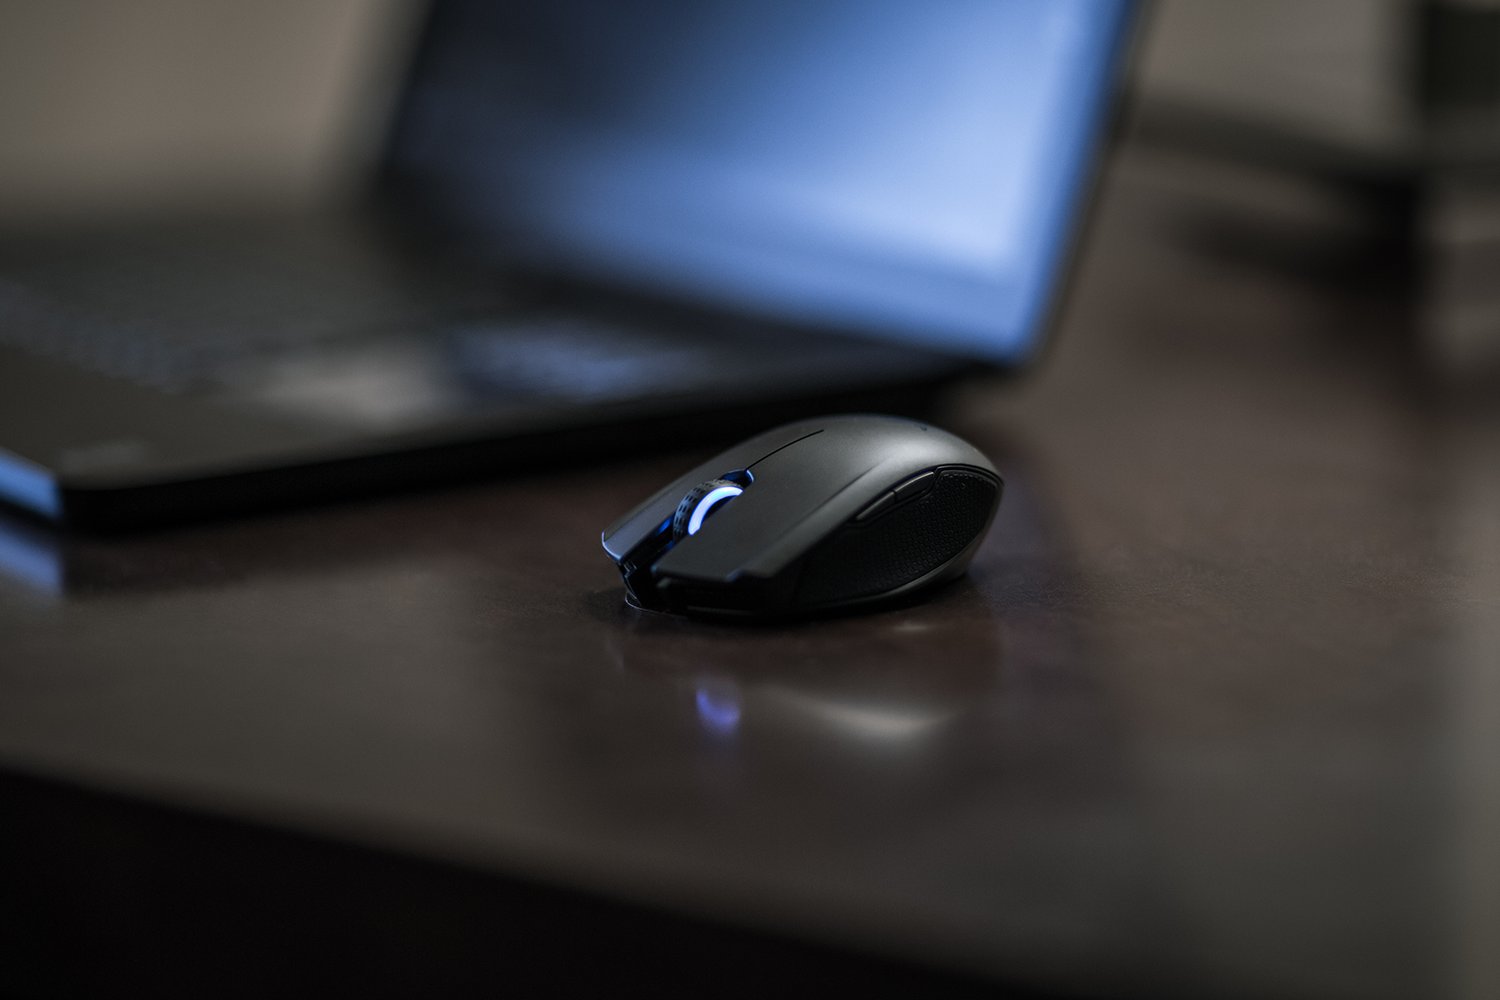 Mac wireless mouse software download windows 10